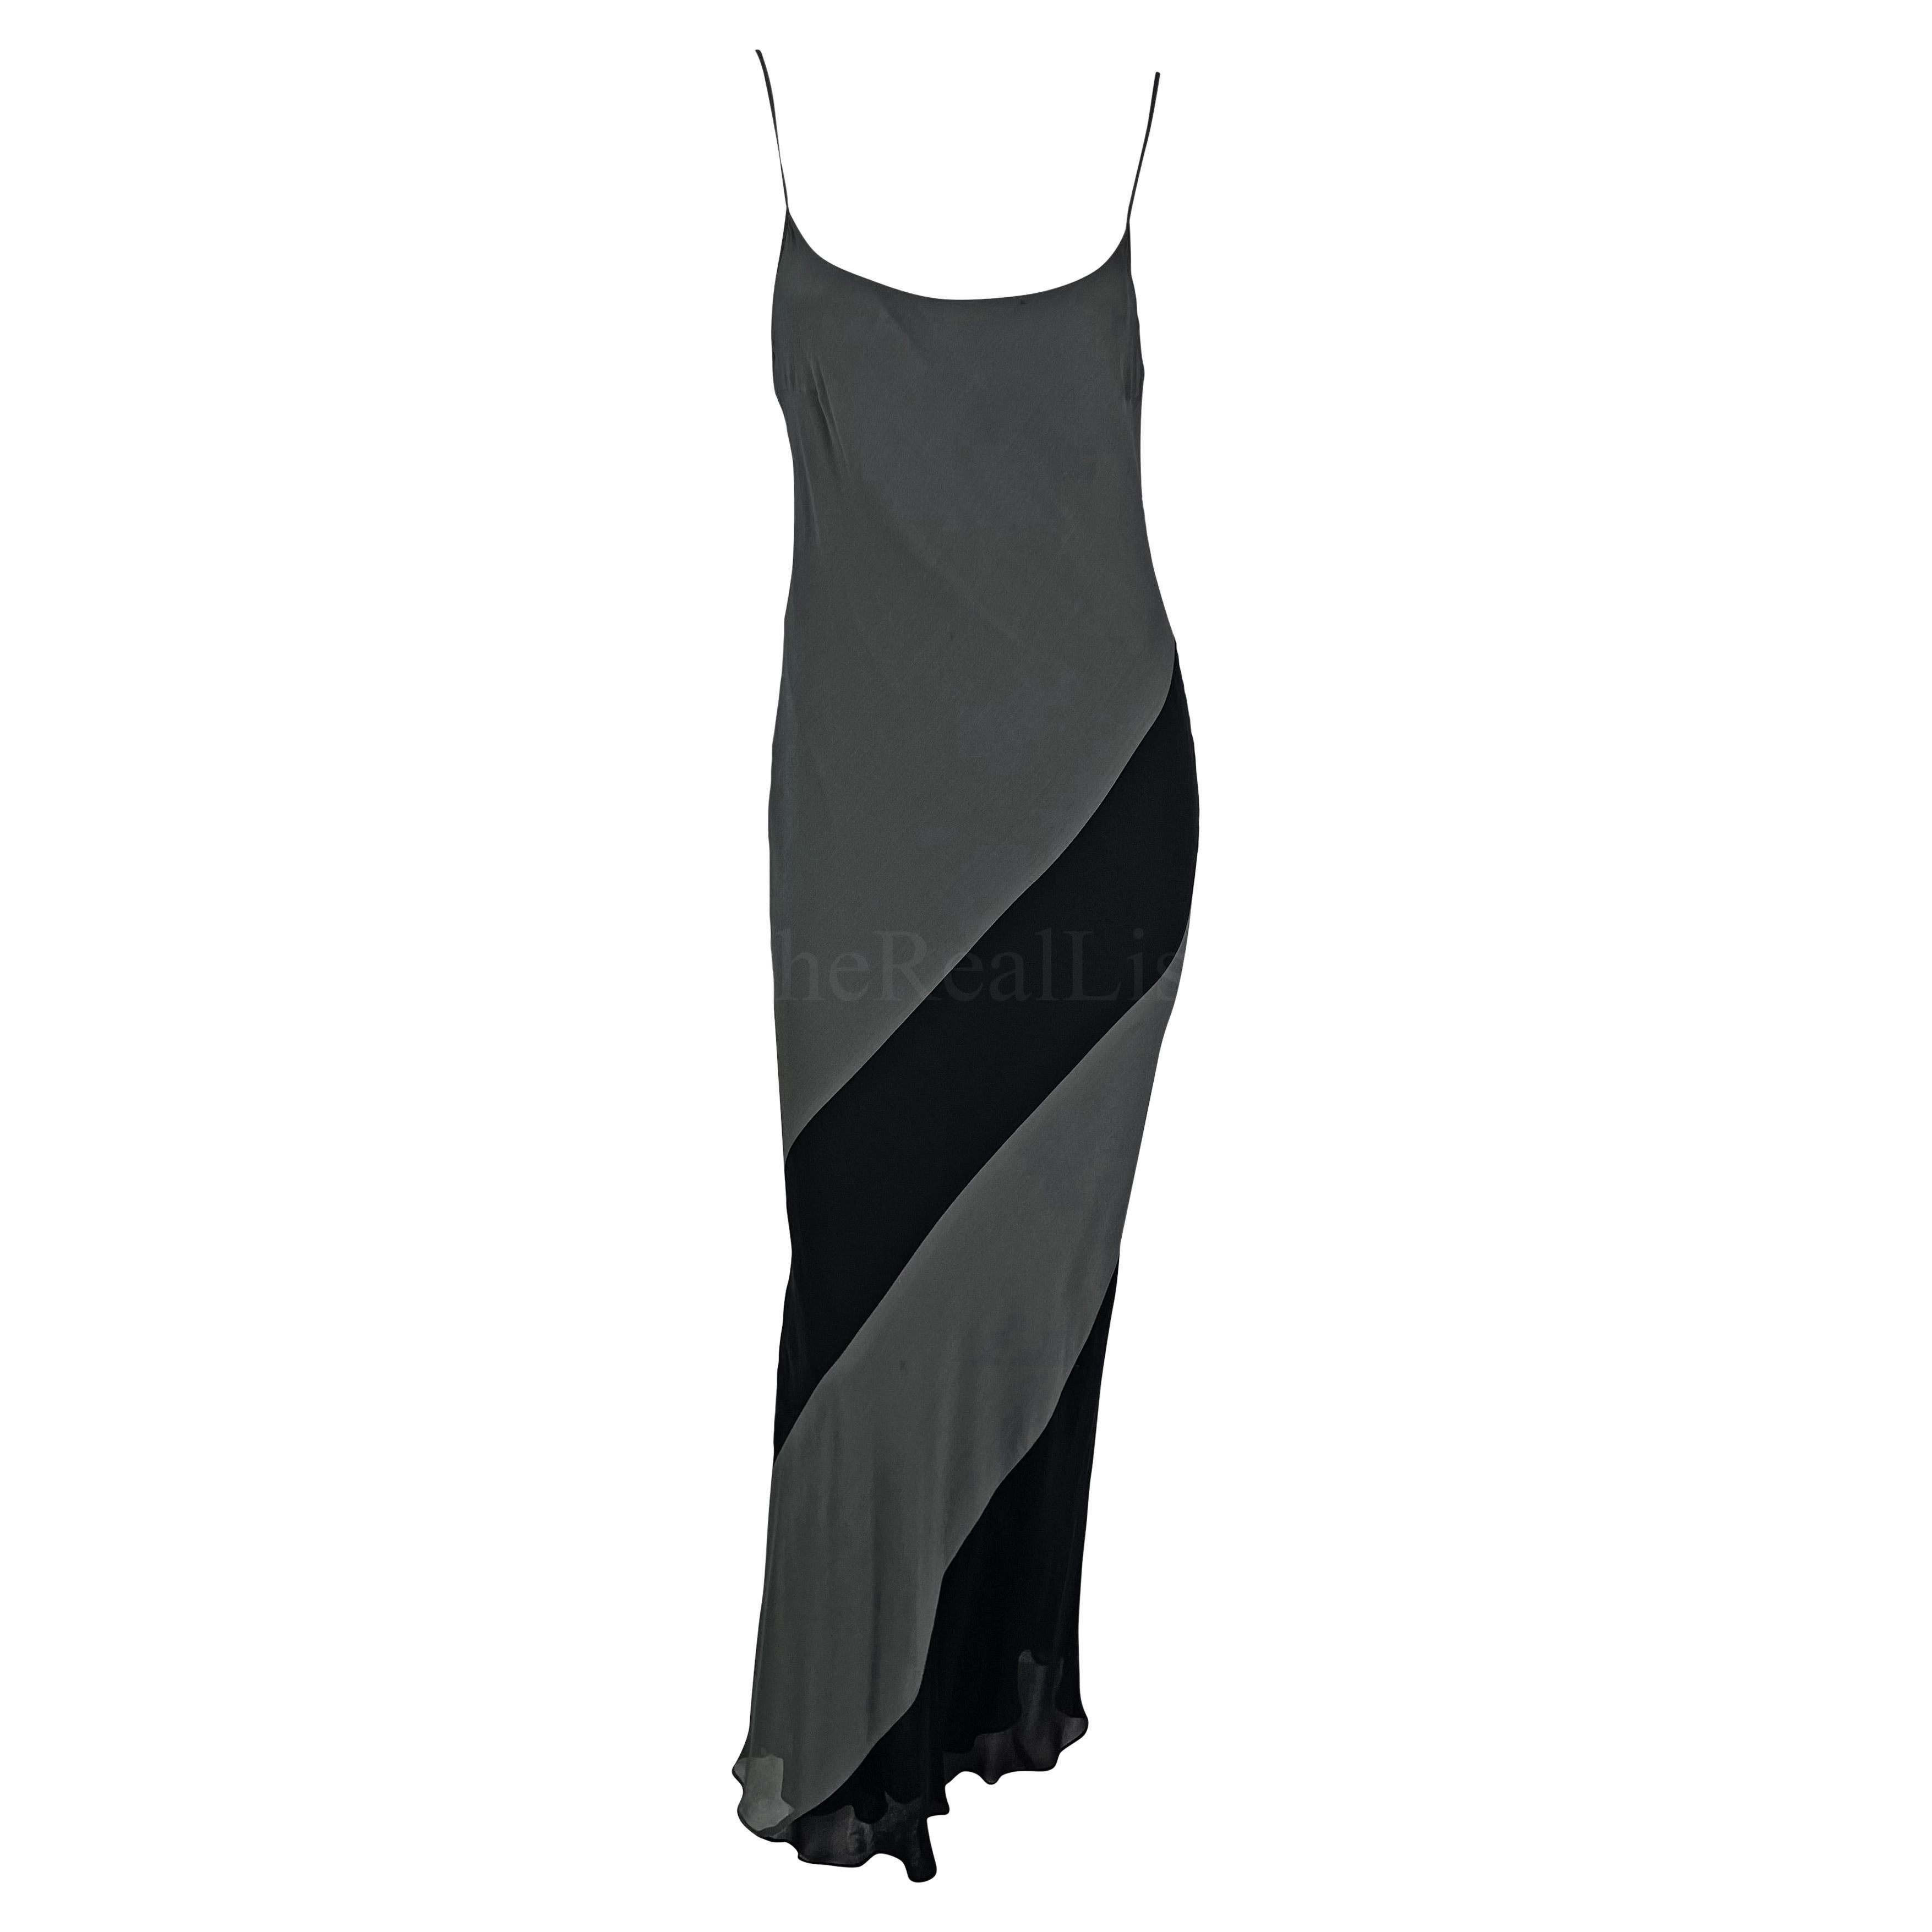 S/S 1997 Gucci by Tom Ford Grey Black Panel Slip Dress Gown For Sale